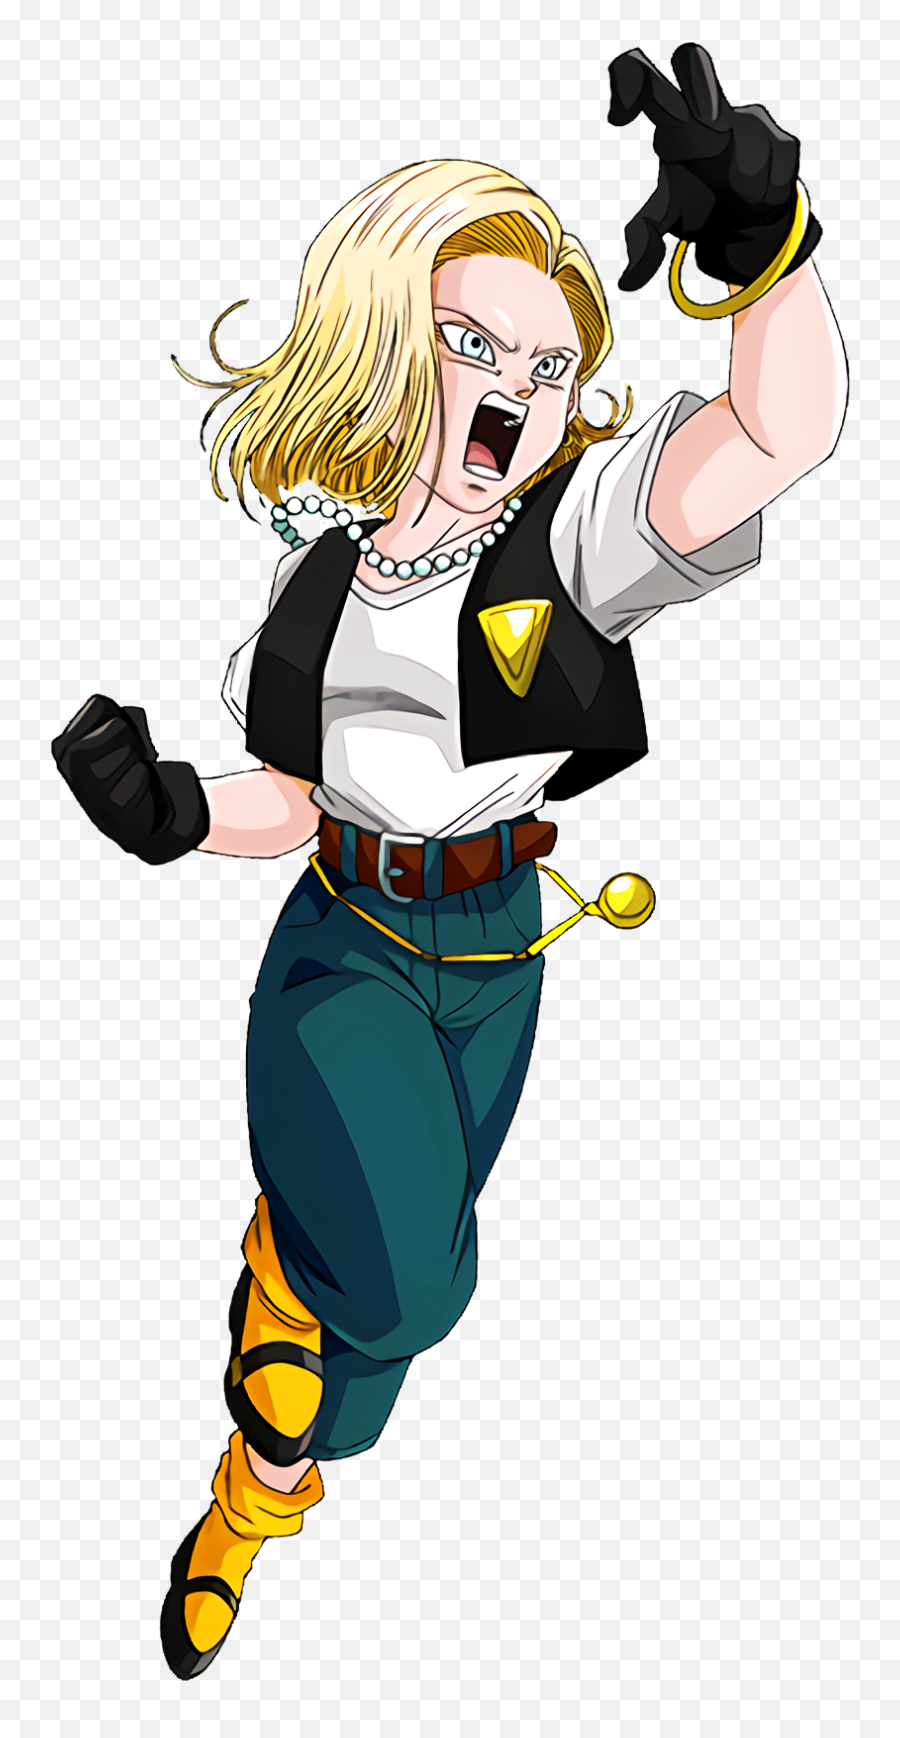 Mental Power That Continues To Resist - Dbz Android 18 Render Emoji,Superhero Emojis For Android